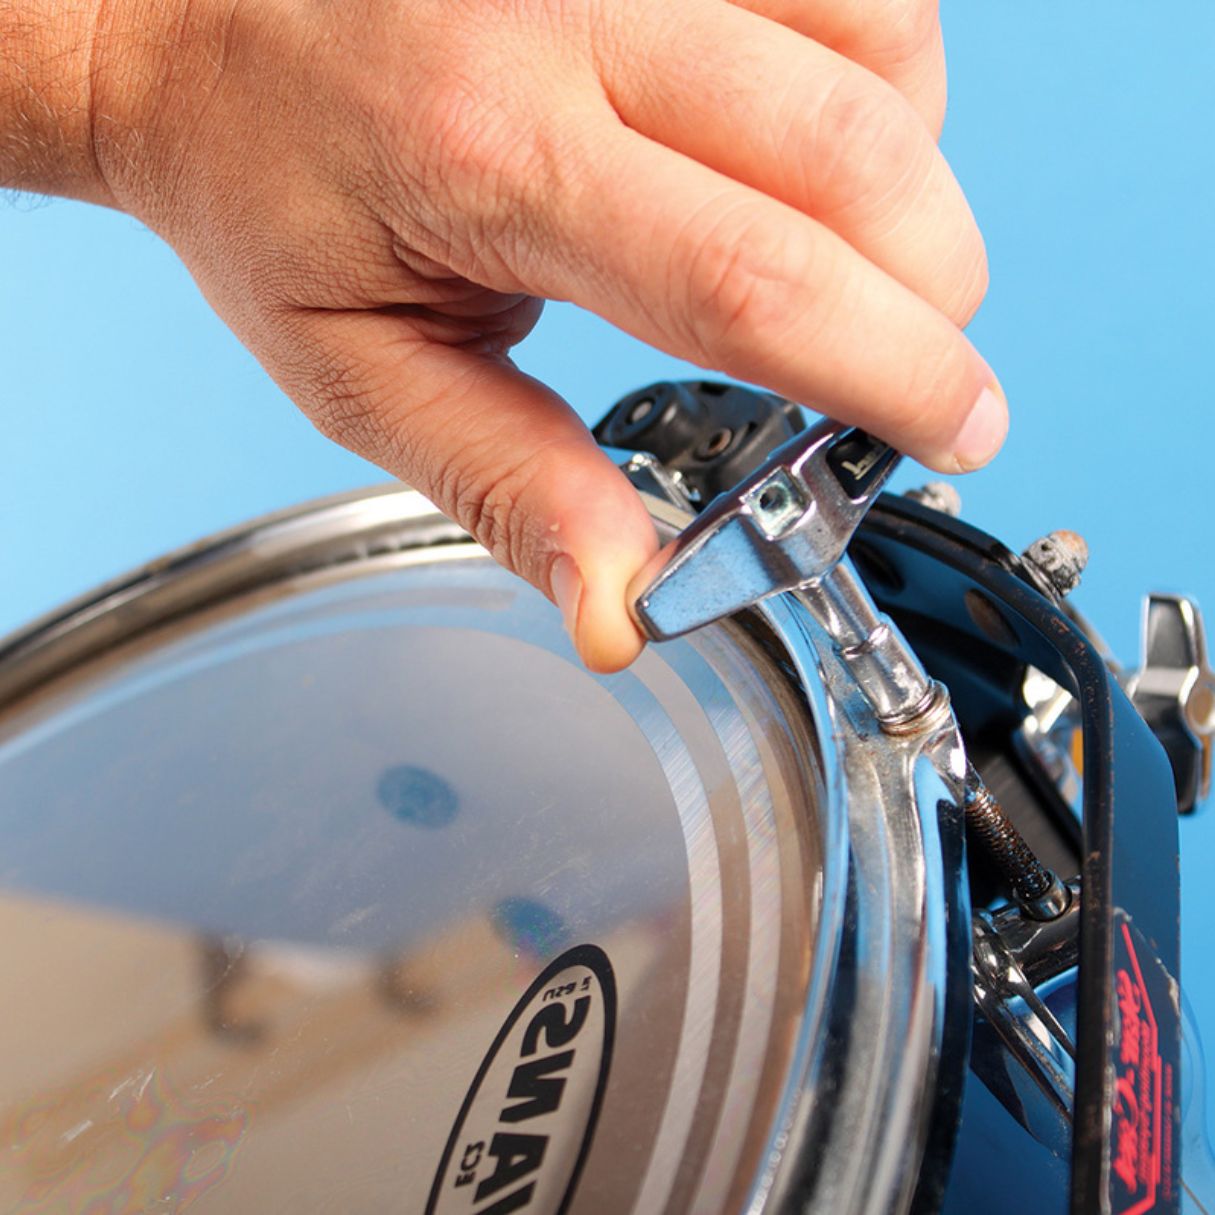 Drum Set Tuning Key Review: Unlocking the Perfect Sound